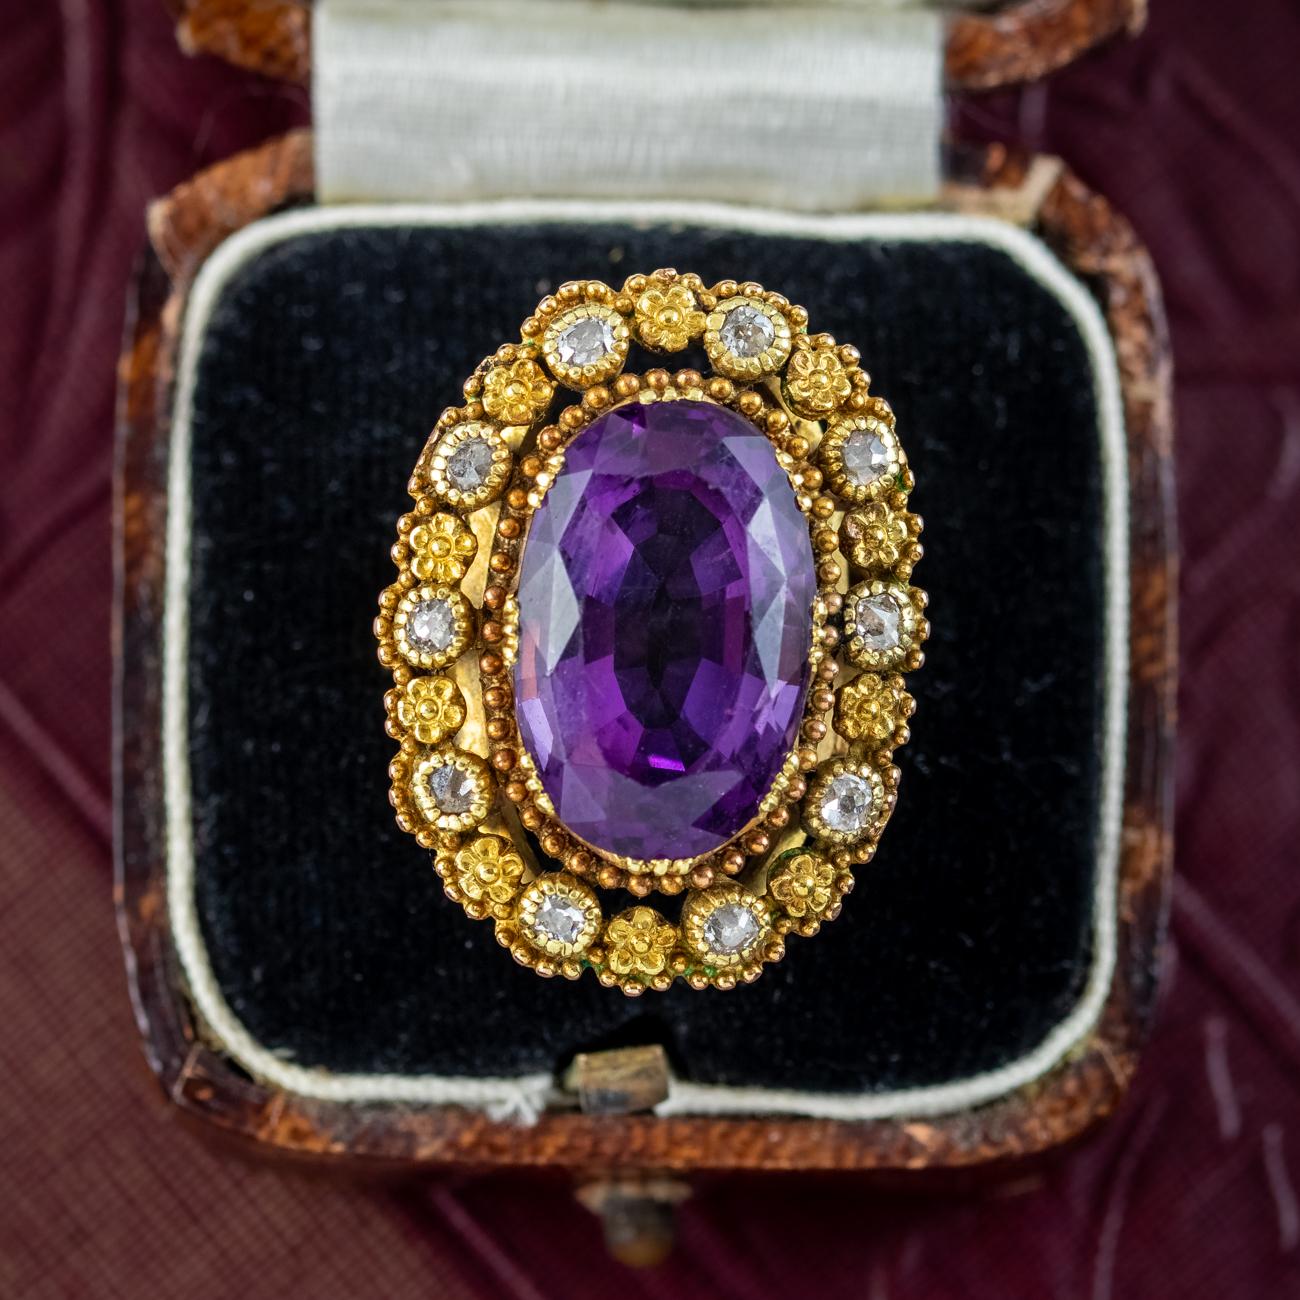 Antique Victorian Amethyst Diamond Ring 7.2ct Amethyst For Sale 3